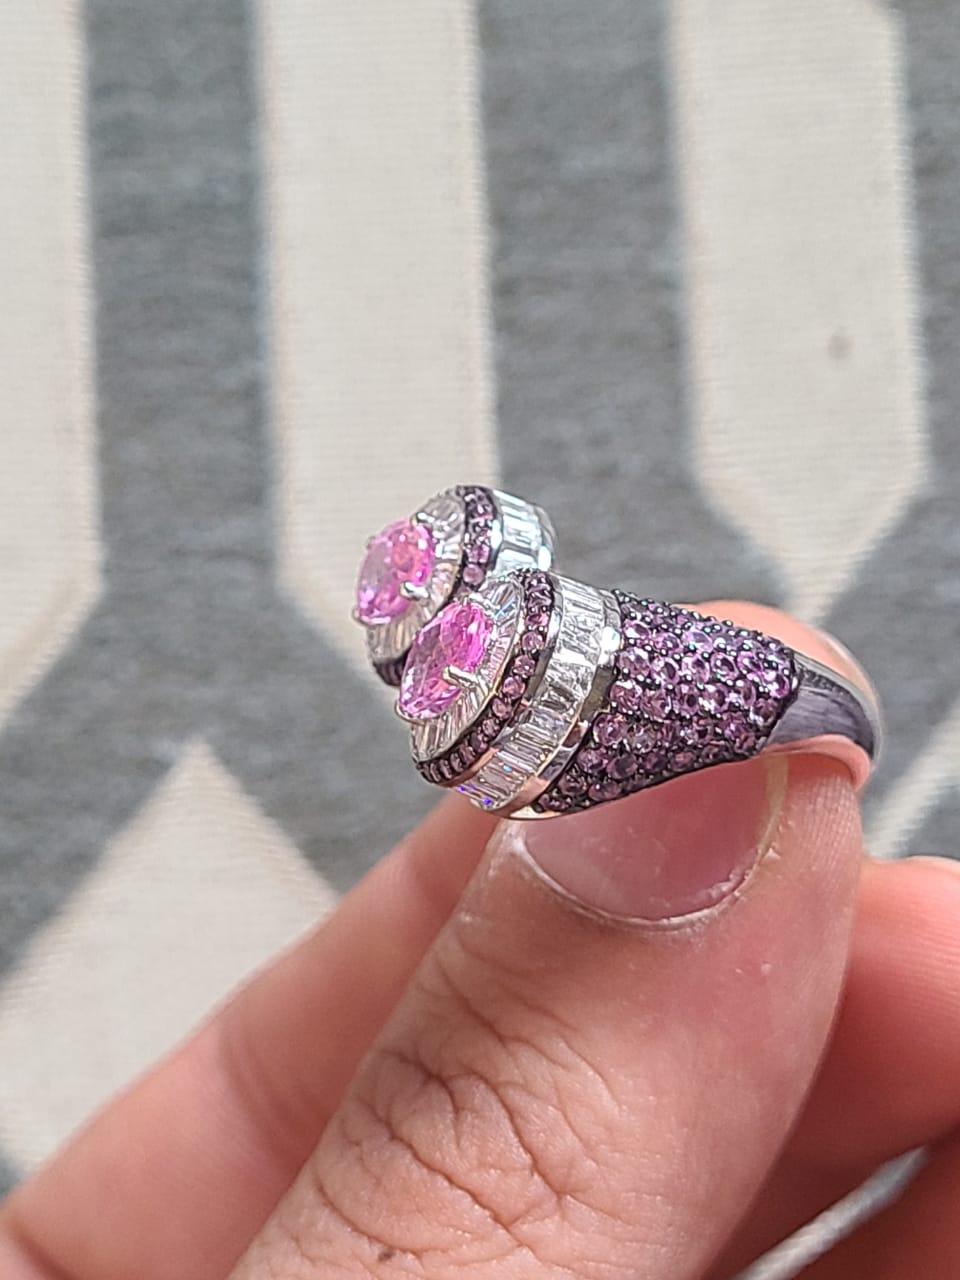 A very gorgeous and one of a kind, Pink Sapphires Cocktail Ring set in 18K White Gold & Diamonds. The weight of the Pink Sapphires is 4.01 carats. The Pink Sapphires are of Madagascar origin. The weight of the Diamonds is 1.34 carats. Net Gold